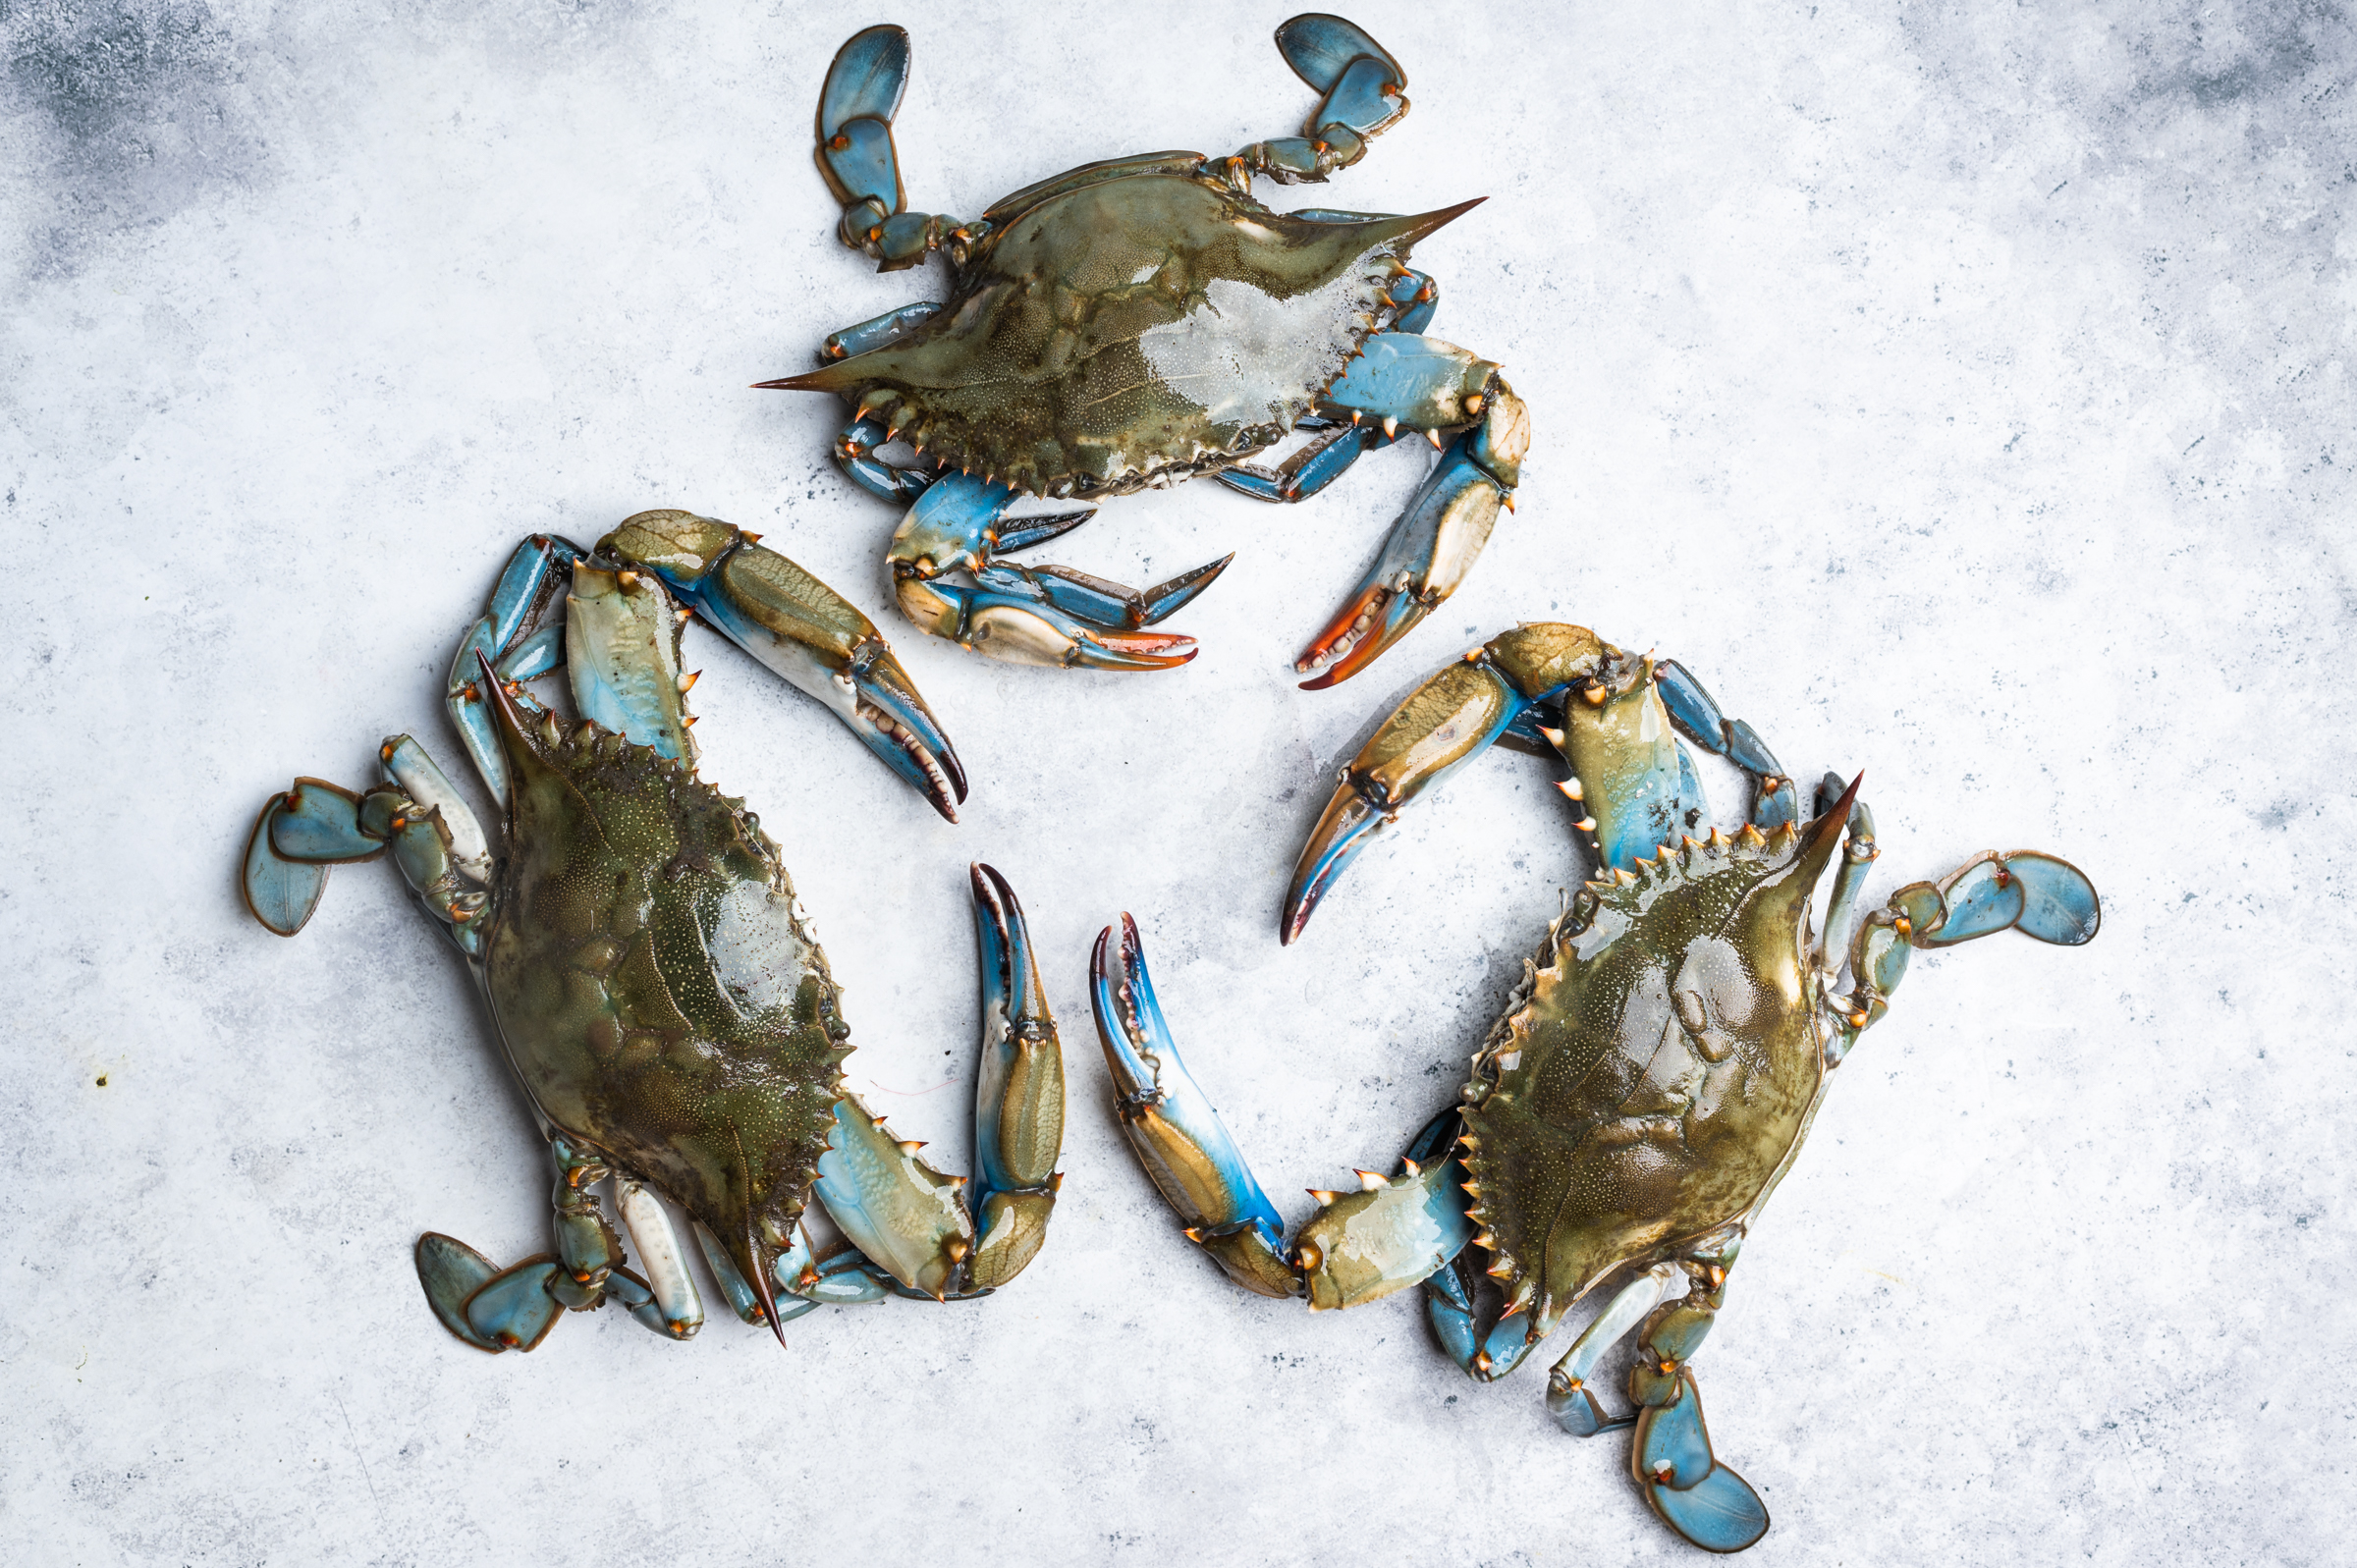 Three live blue crabs - two females and one male